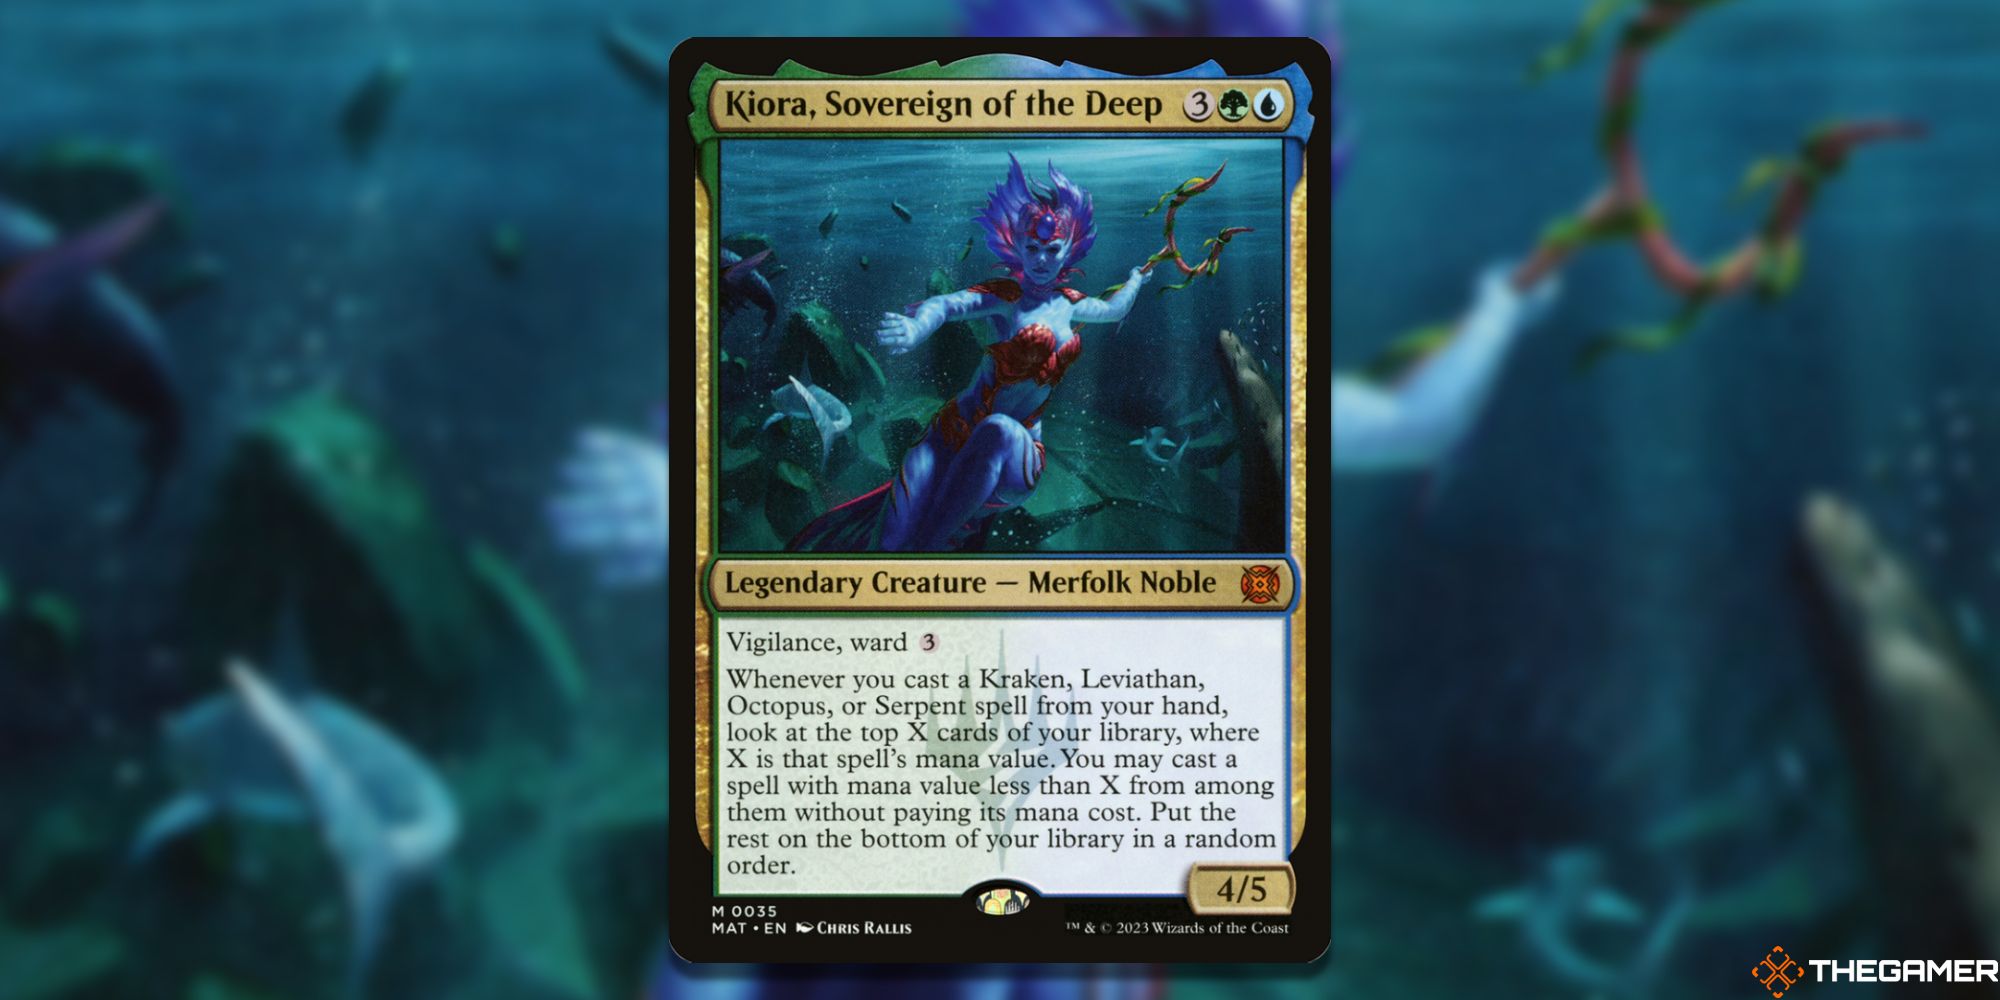 Image of the Kiora, Sovereign of the Deep card in Magic: The Gathering, with art by Chris Rallis